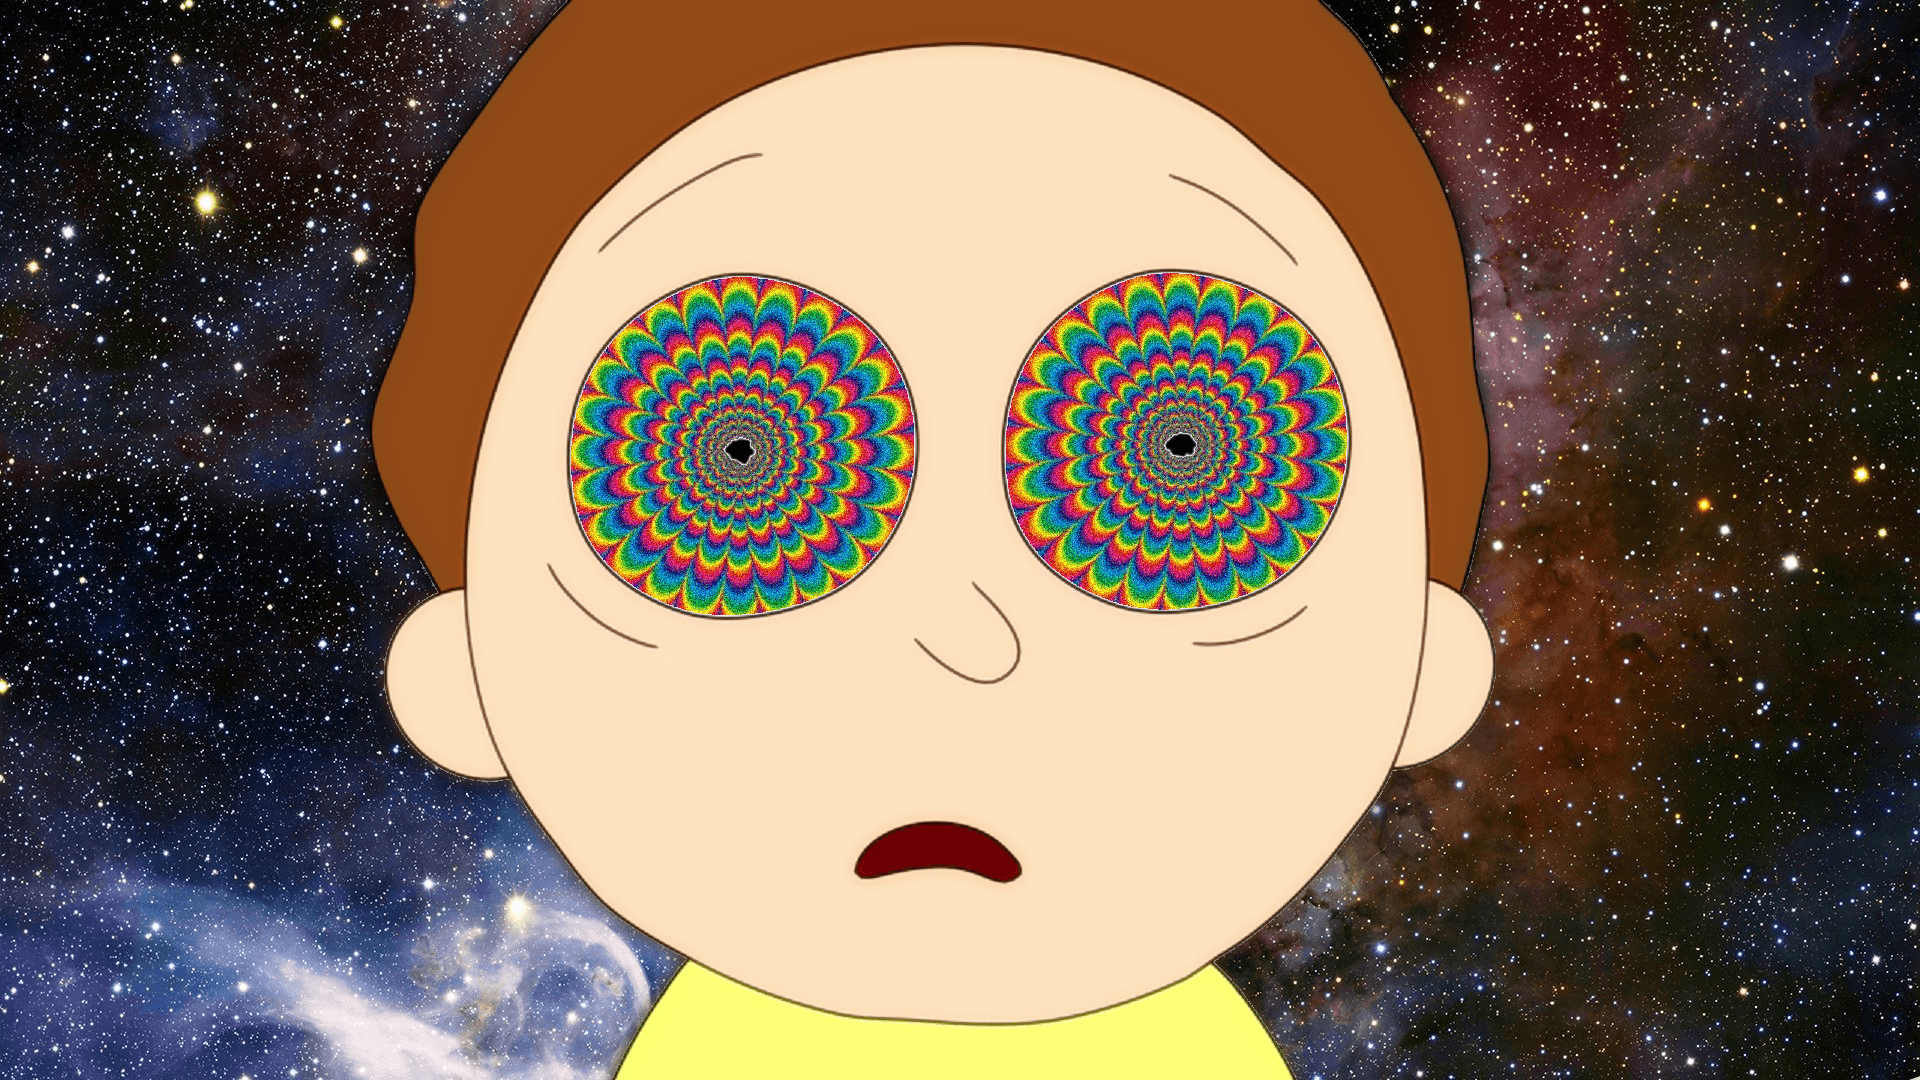 A Morty Wallpaper I made. I kinda like the psychedelic result